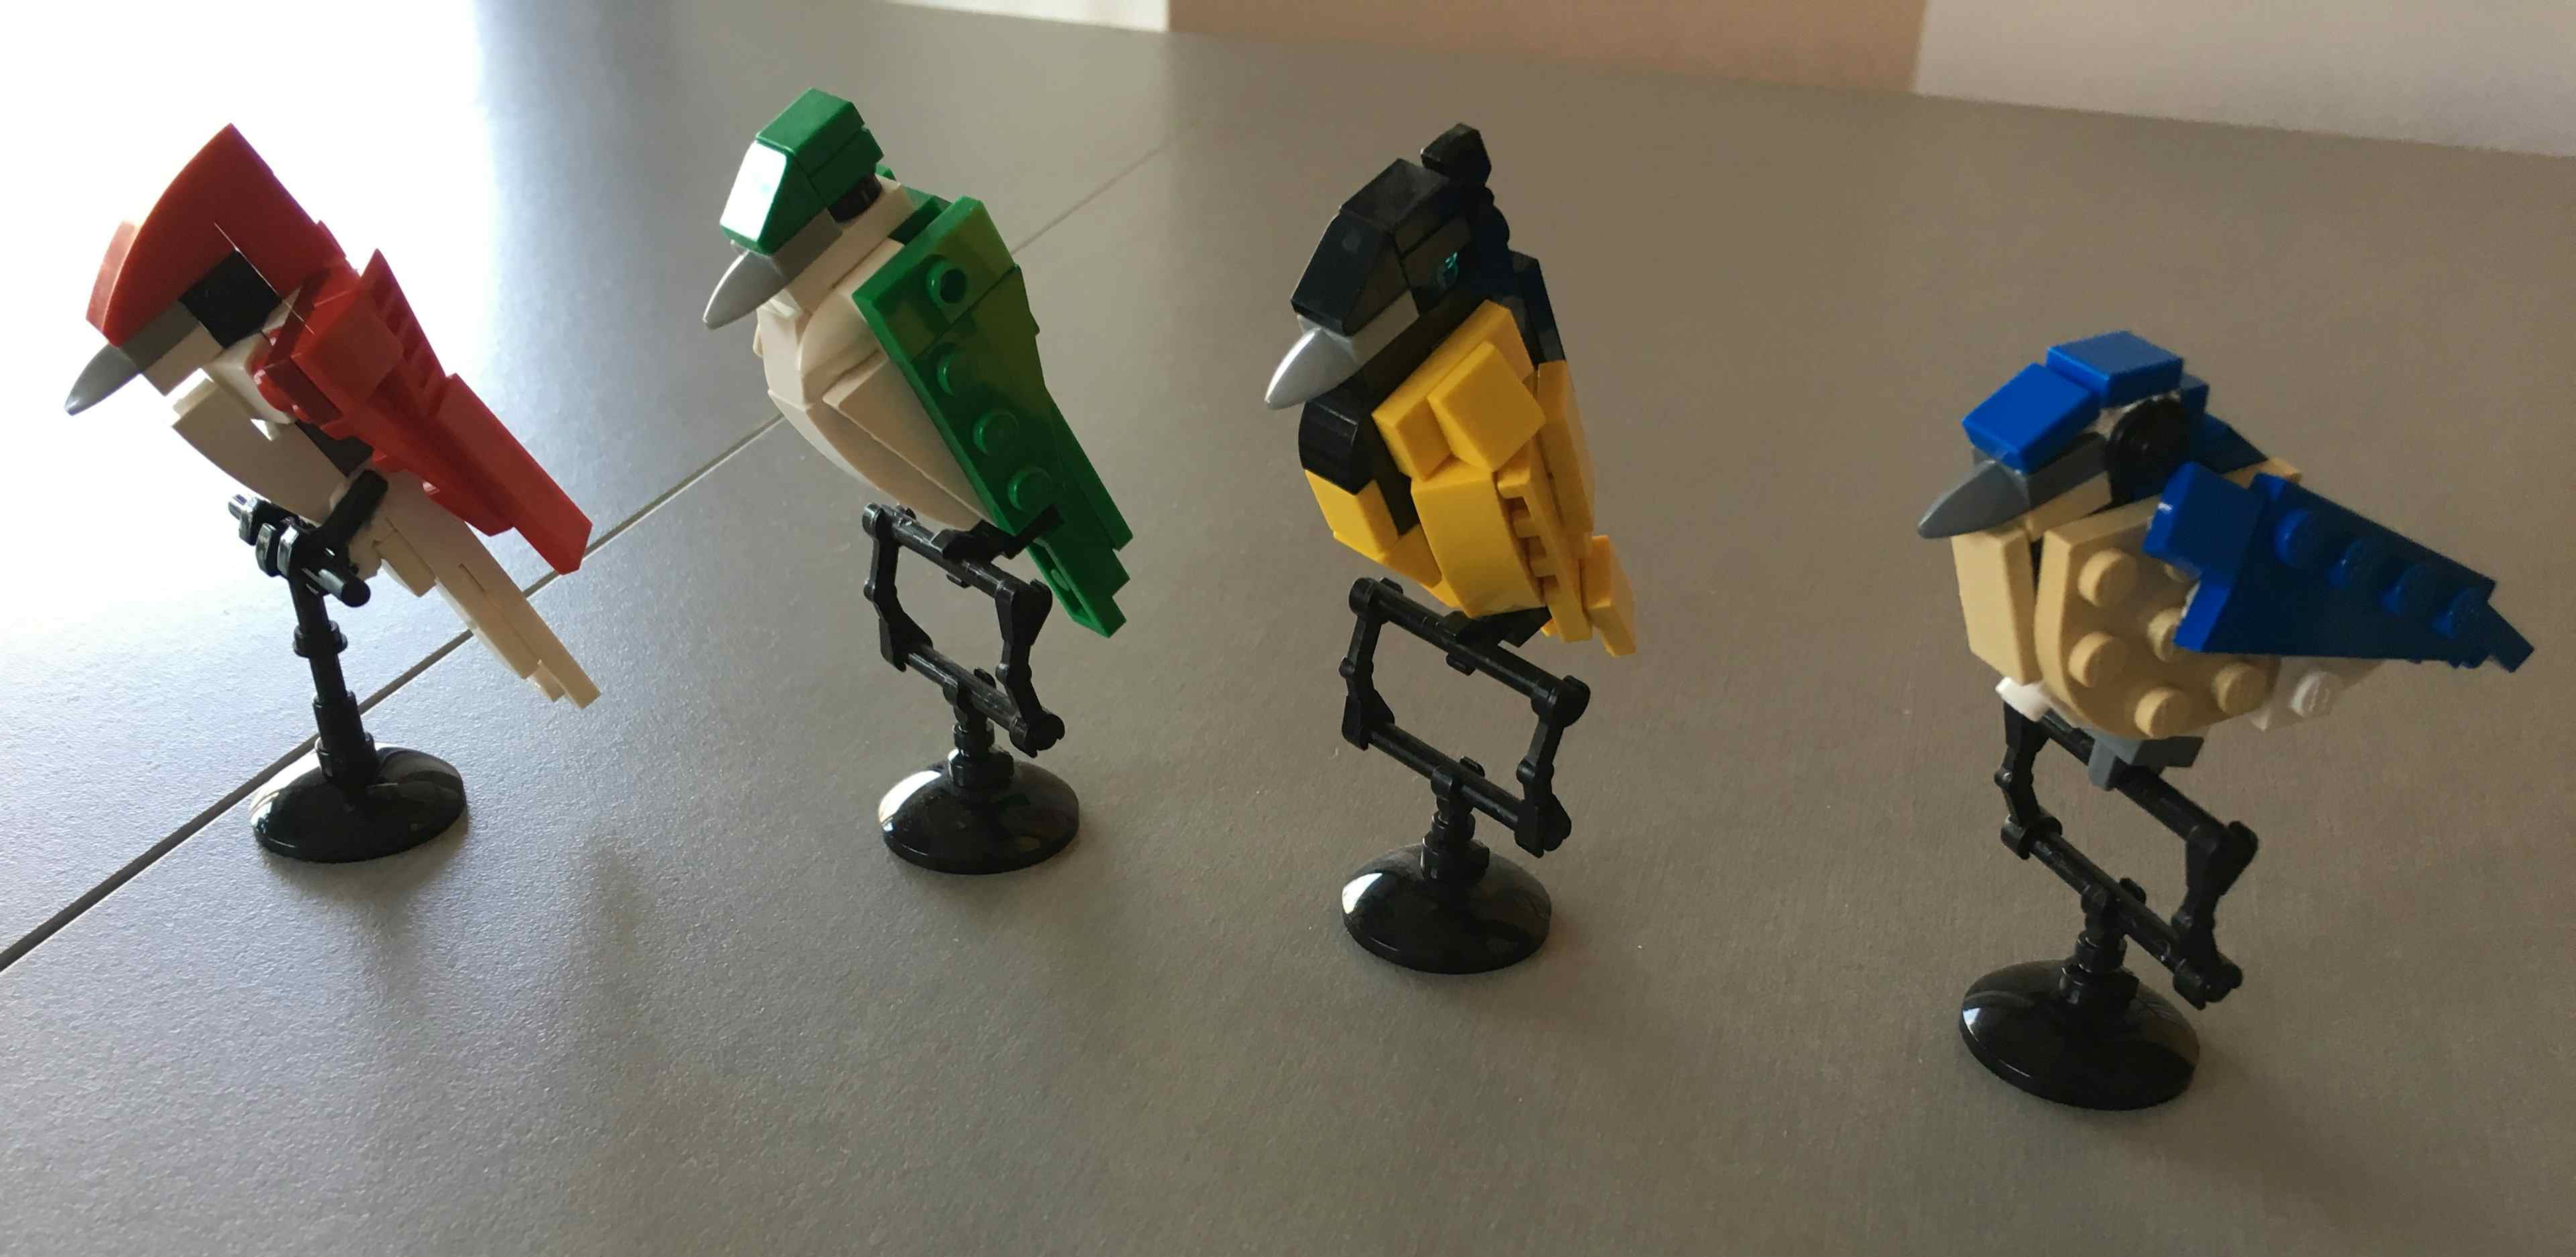 A series of 3" tall LEGO Birds I made with forms inspired by their miniature scale.